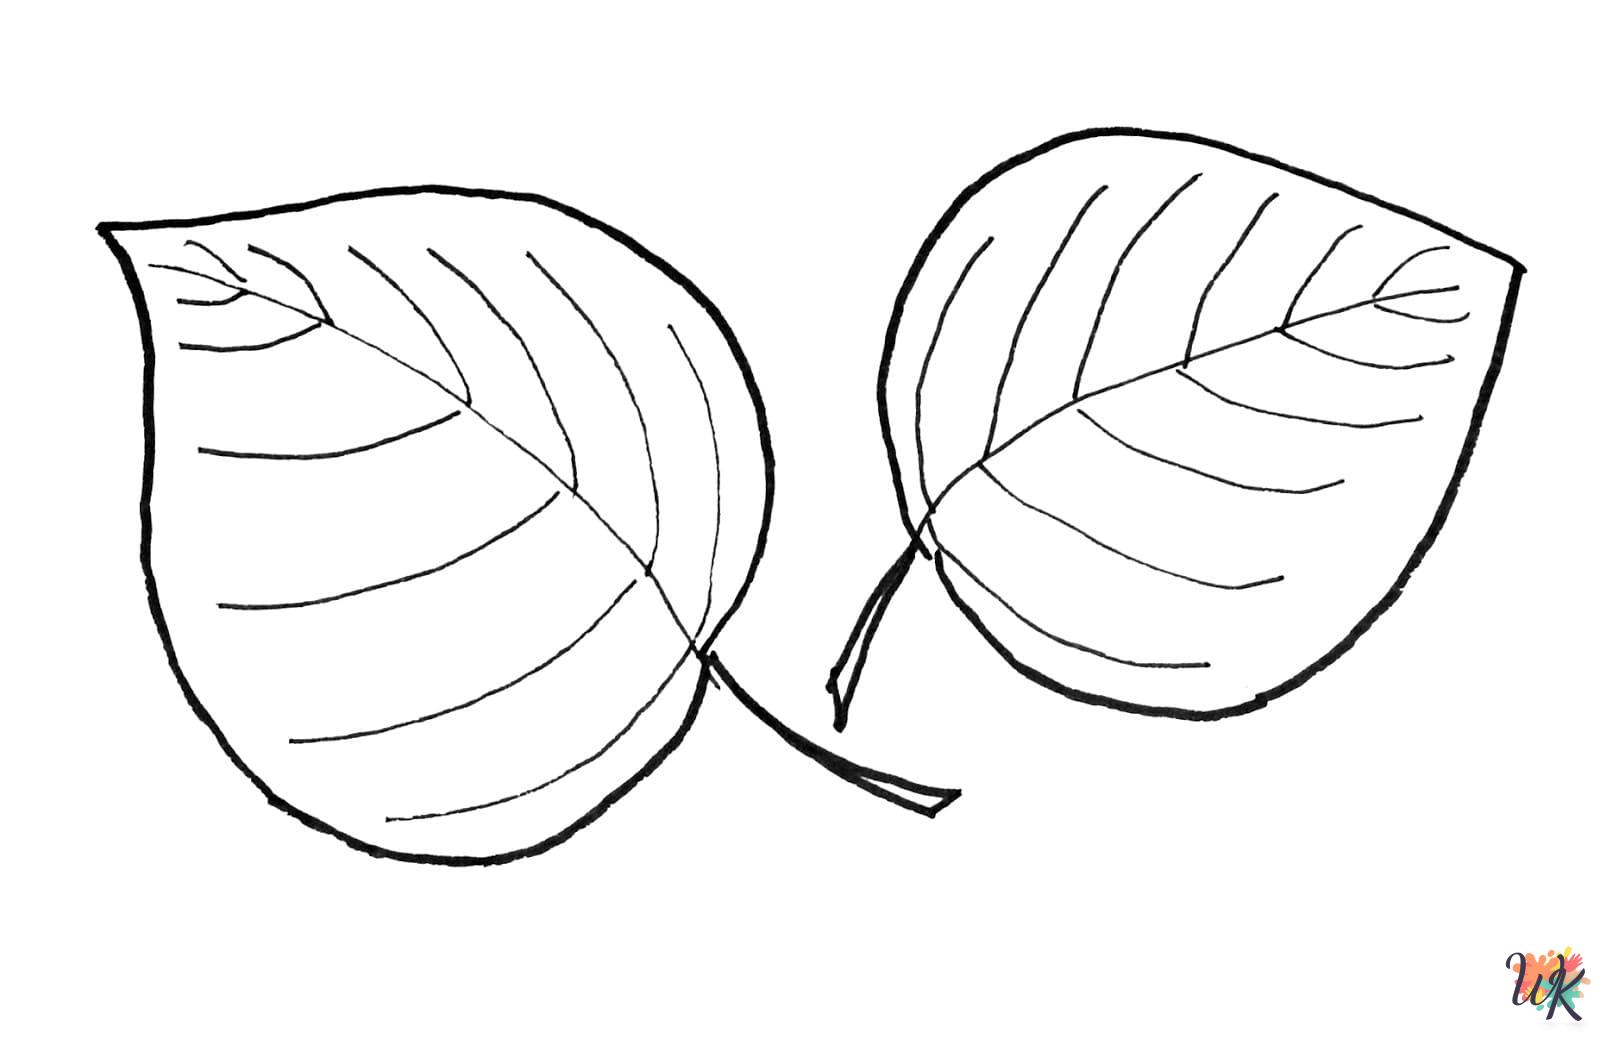 Fall Leaves coloring pages pdf